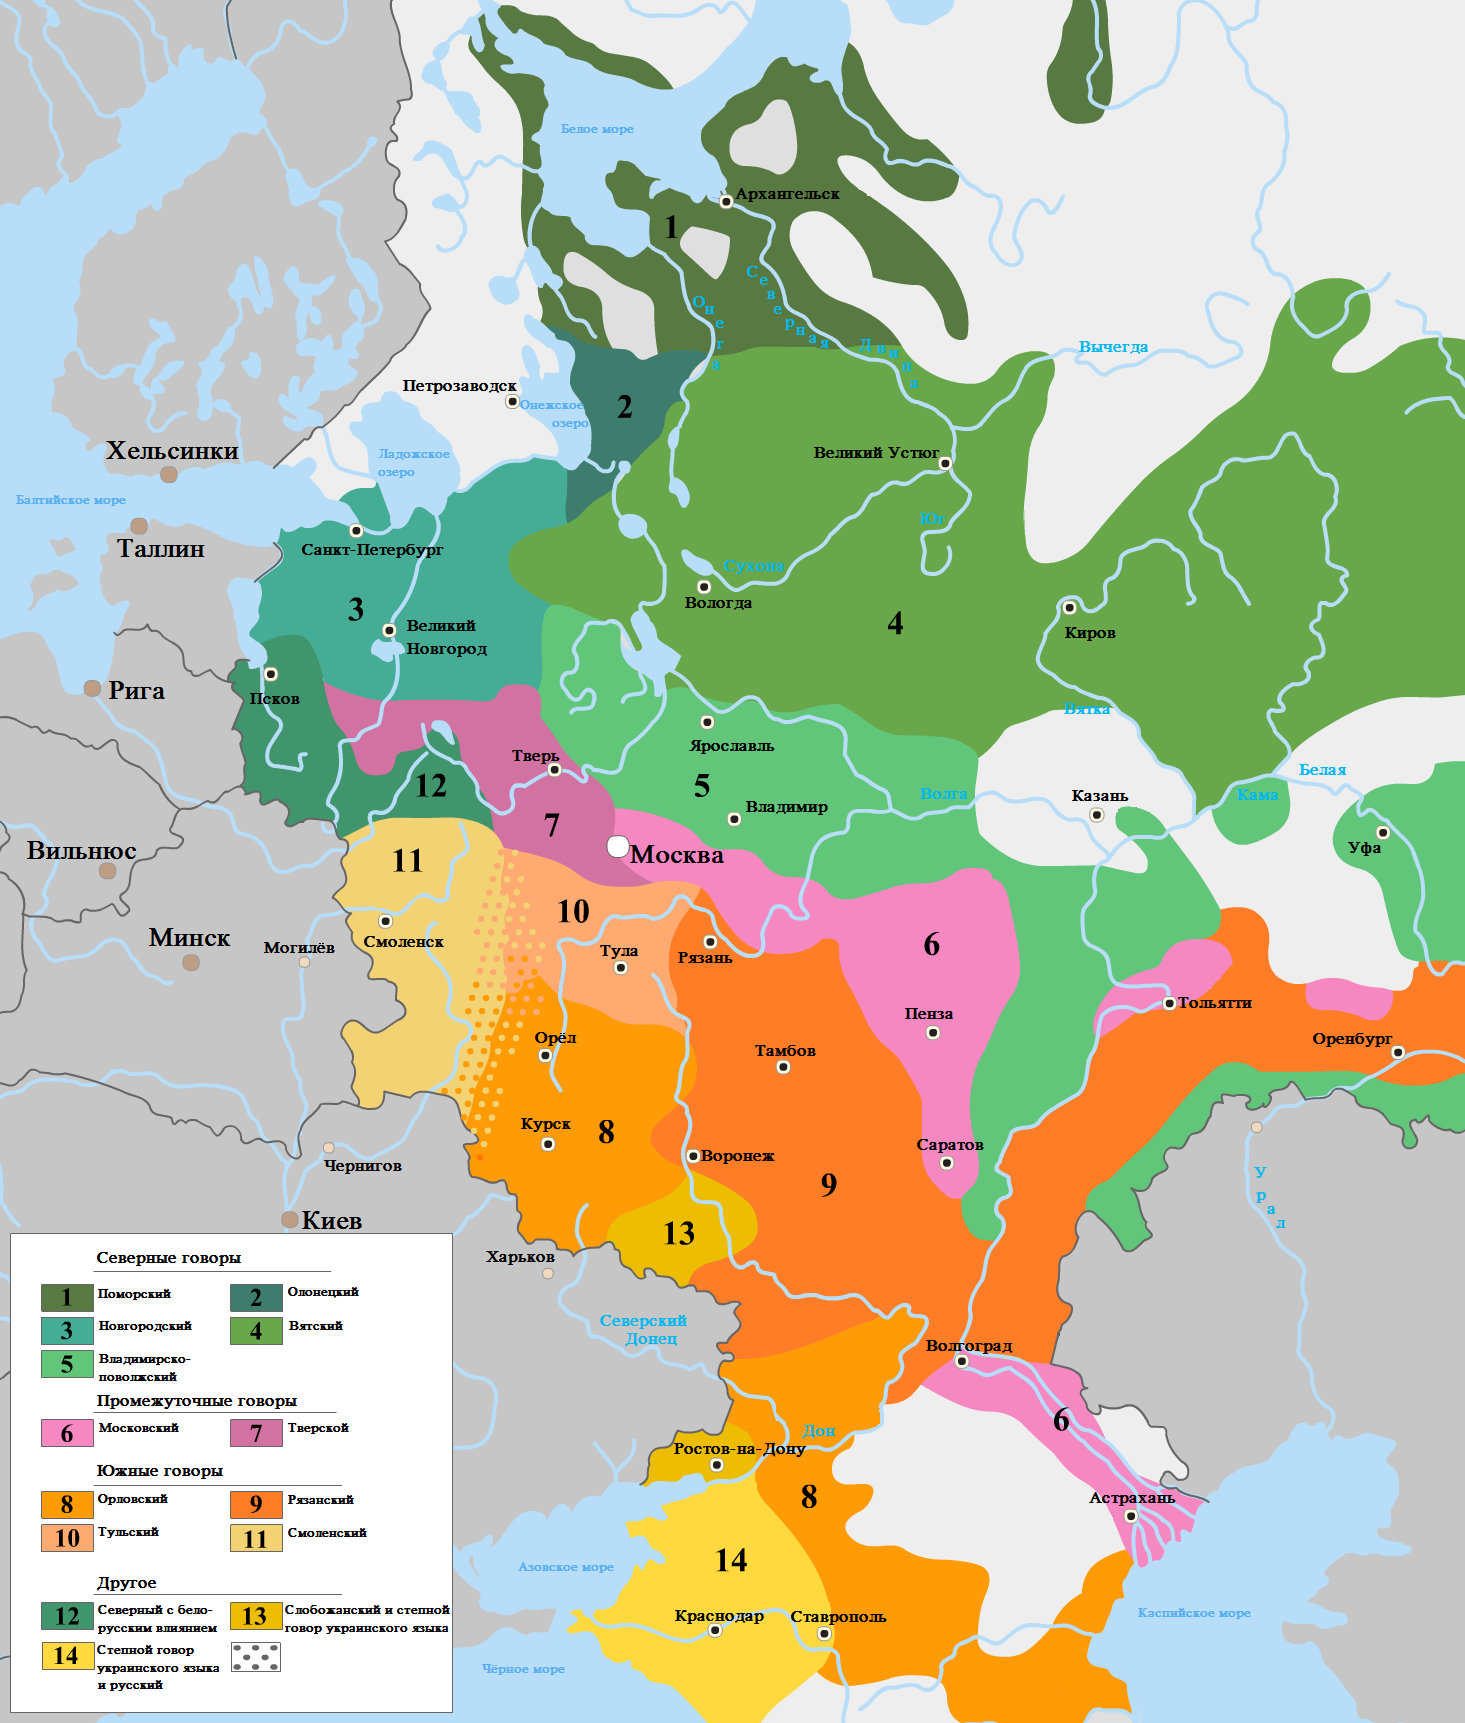 Dialects_of_Russian_language-ru